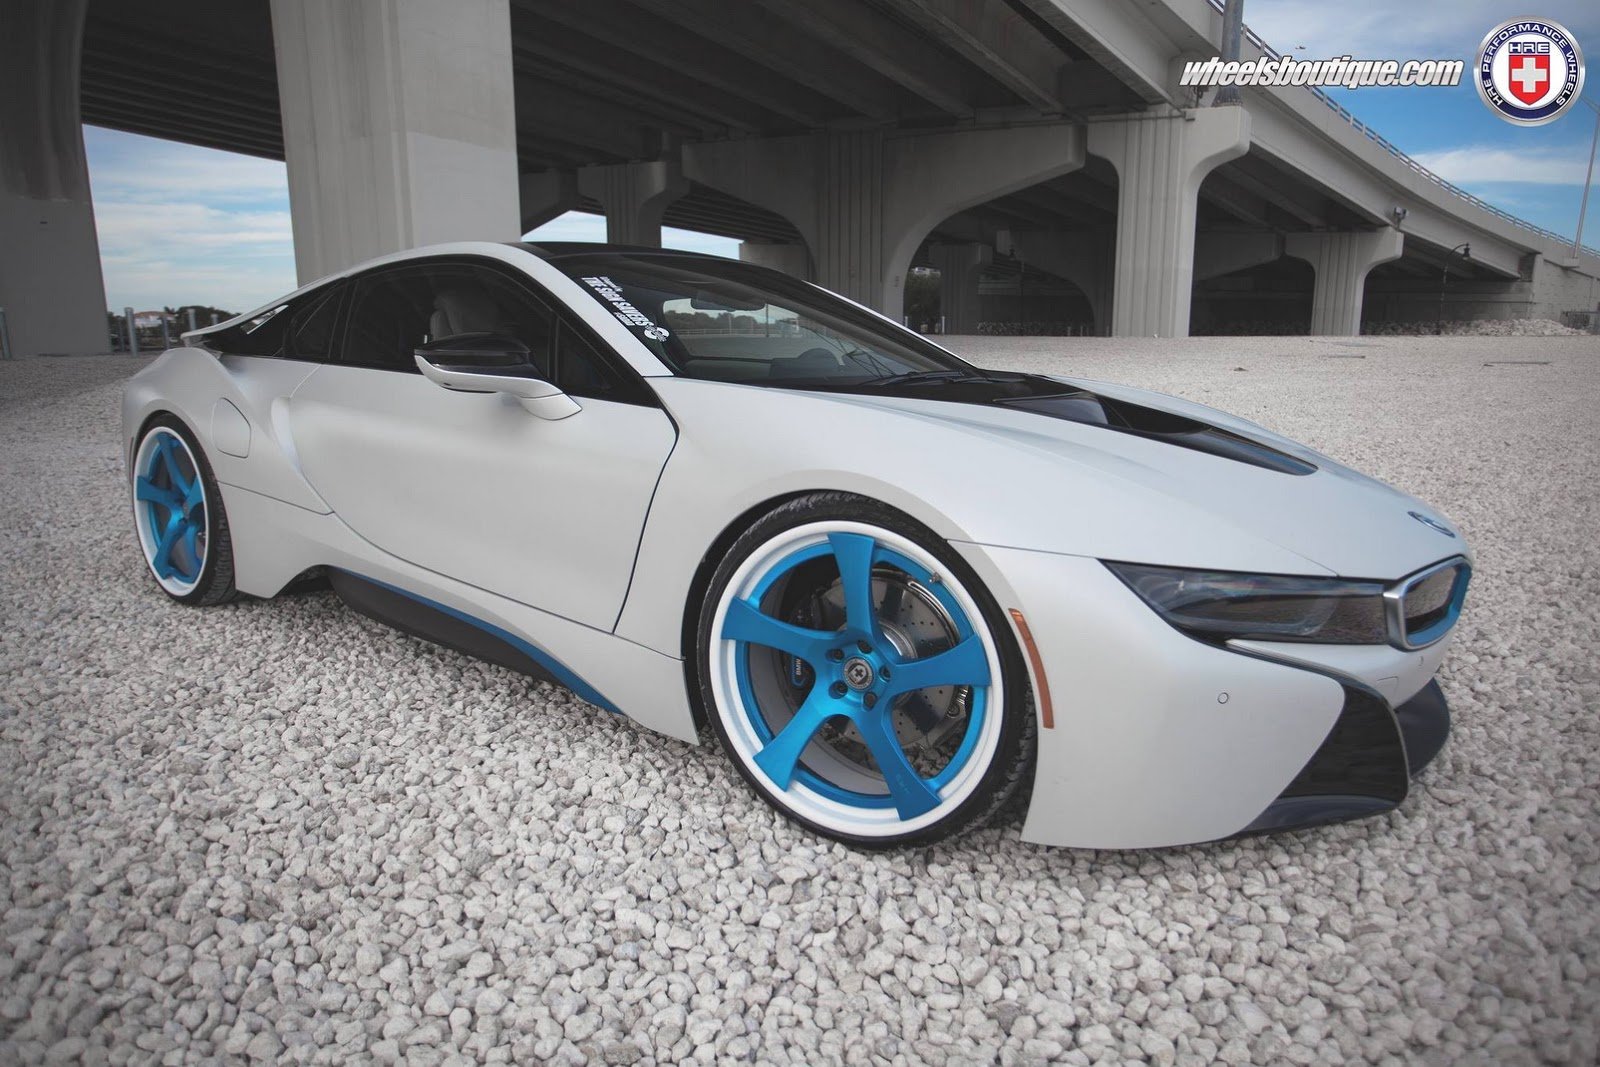 hre, Wheels, Bmw i8, Electric, Cars, Tuning Wallpaper